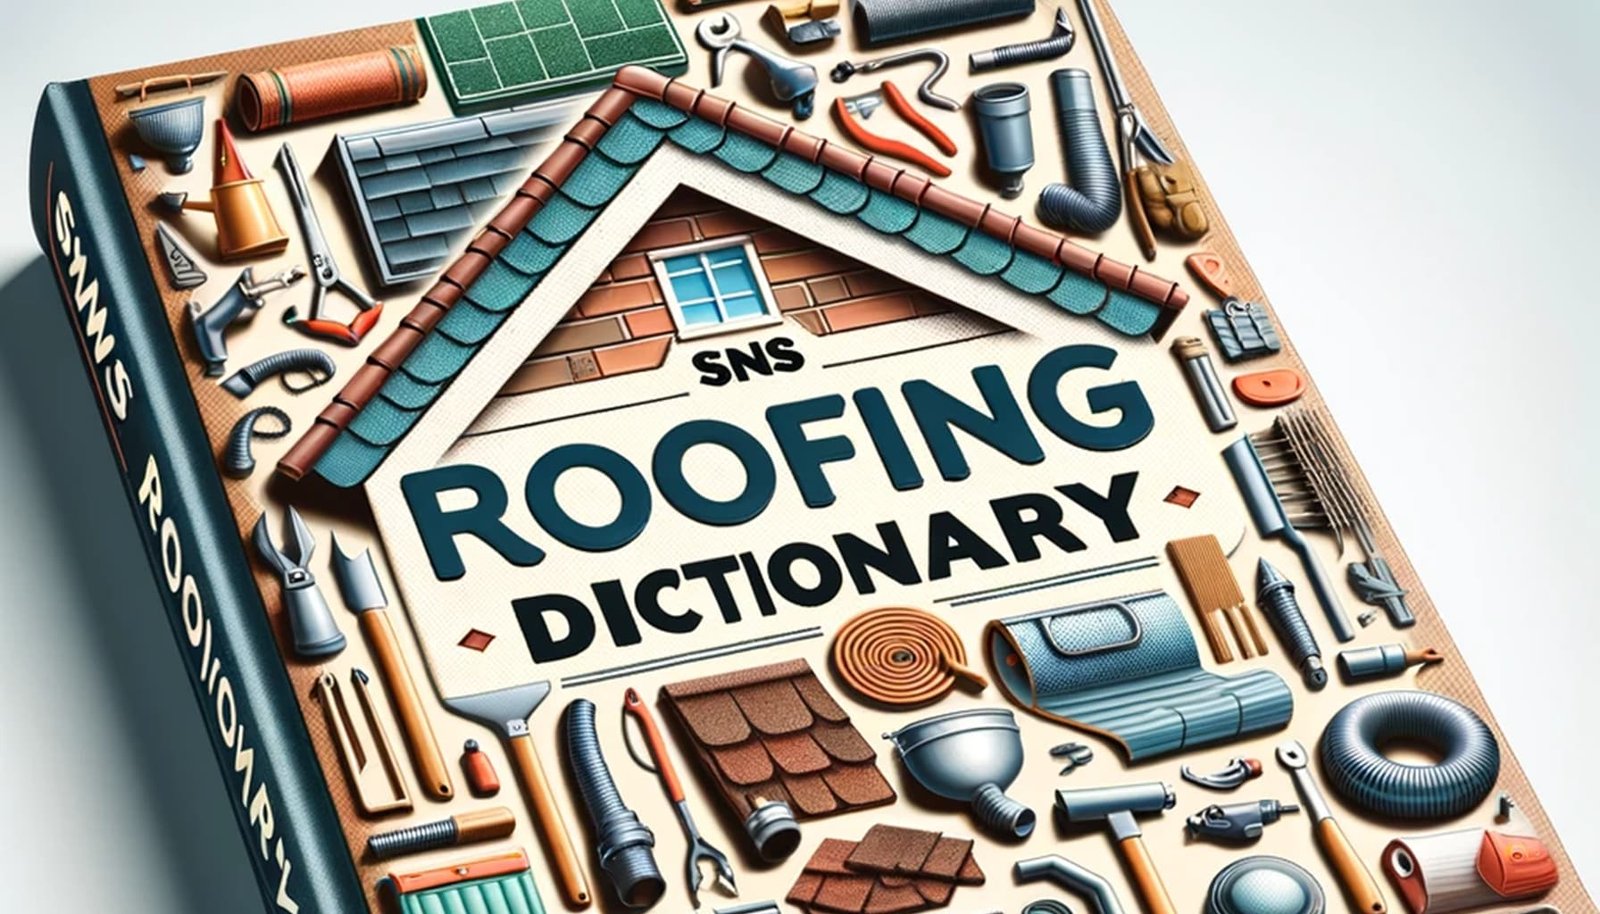 Roofing Terms